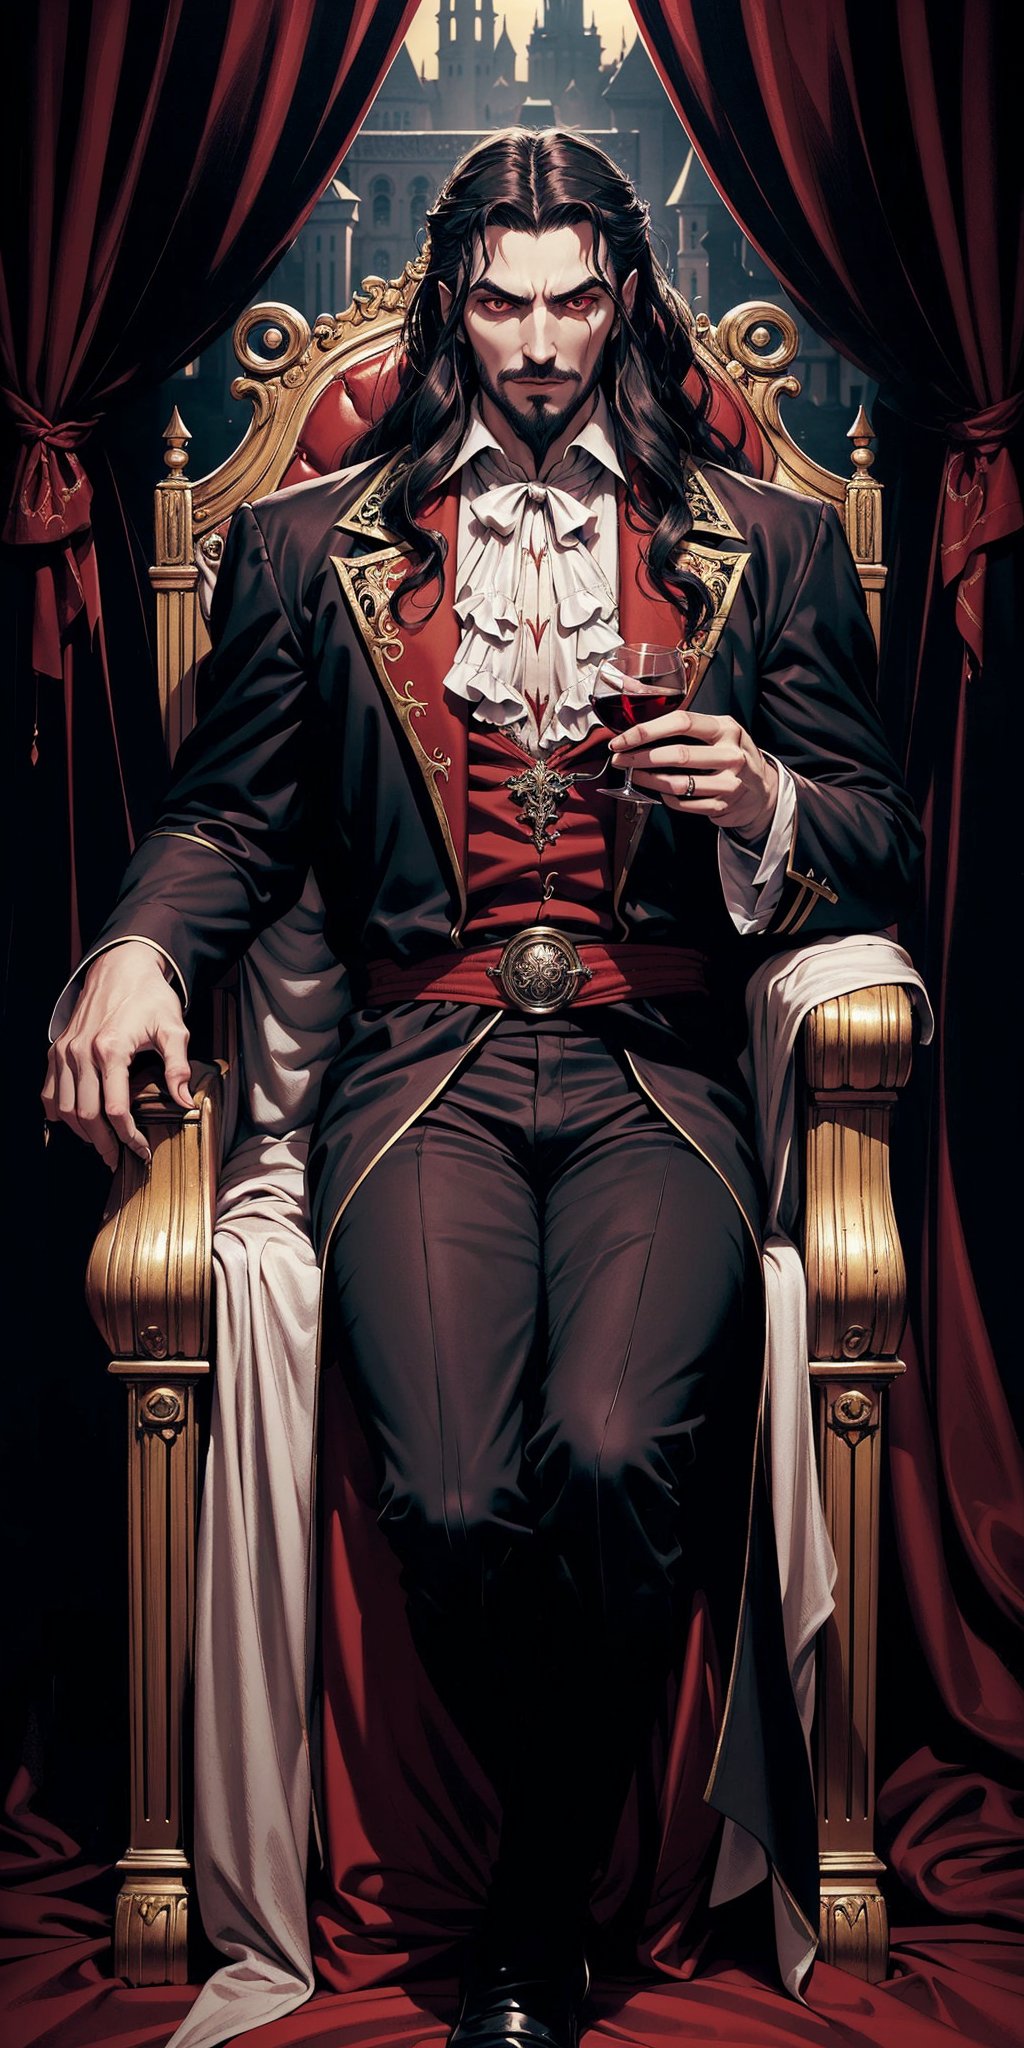 masterpiece,best quality,ultra-detailed,High detailed,picture-perfect face,man,manly,black hair,short beard,confident,arrogant,long hair,curly hair,red glowing eyes,fangs,dracula,castlevania,konami,infront of gothic castle,red and black vamiper attire,ornate and intricate,gold trim,belt,epic pose,fantasy,town,draculacastlevania
on his gothic throne,glass of red wine,